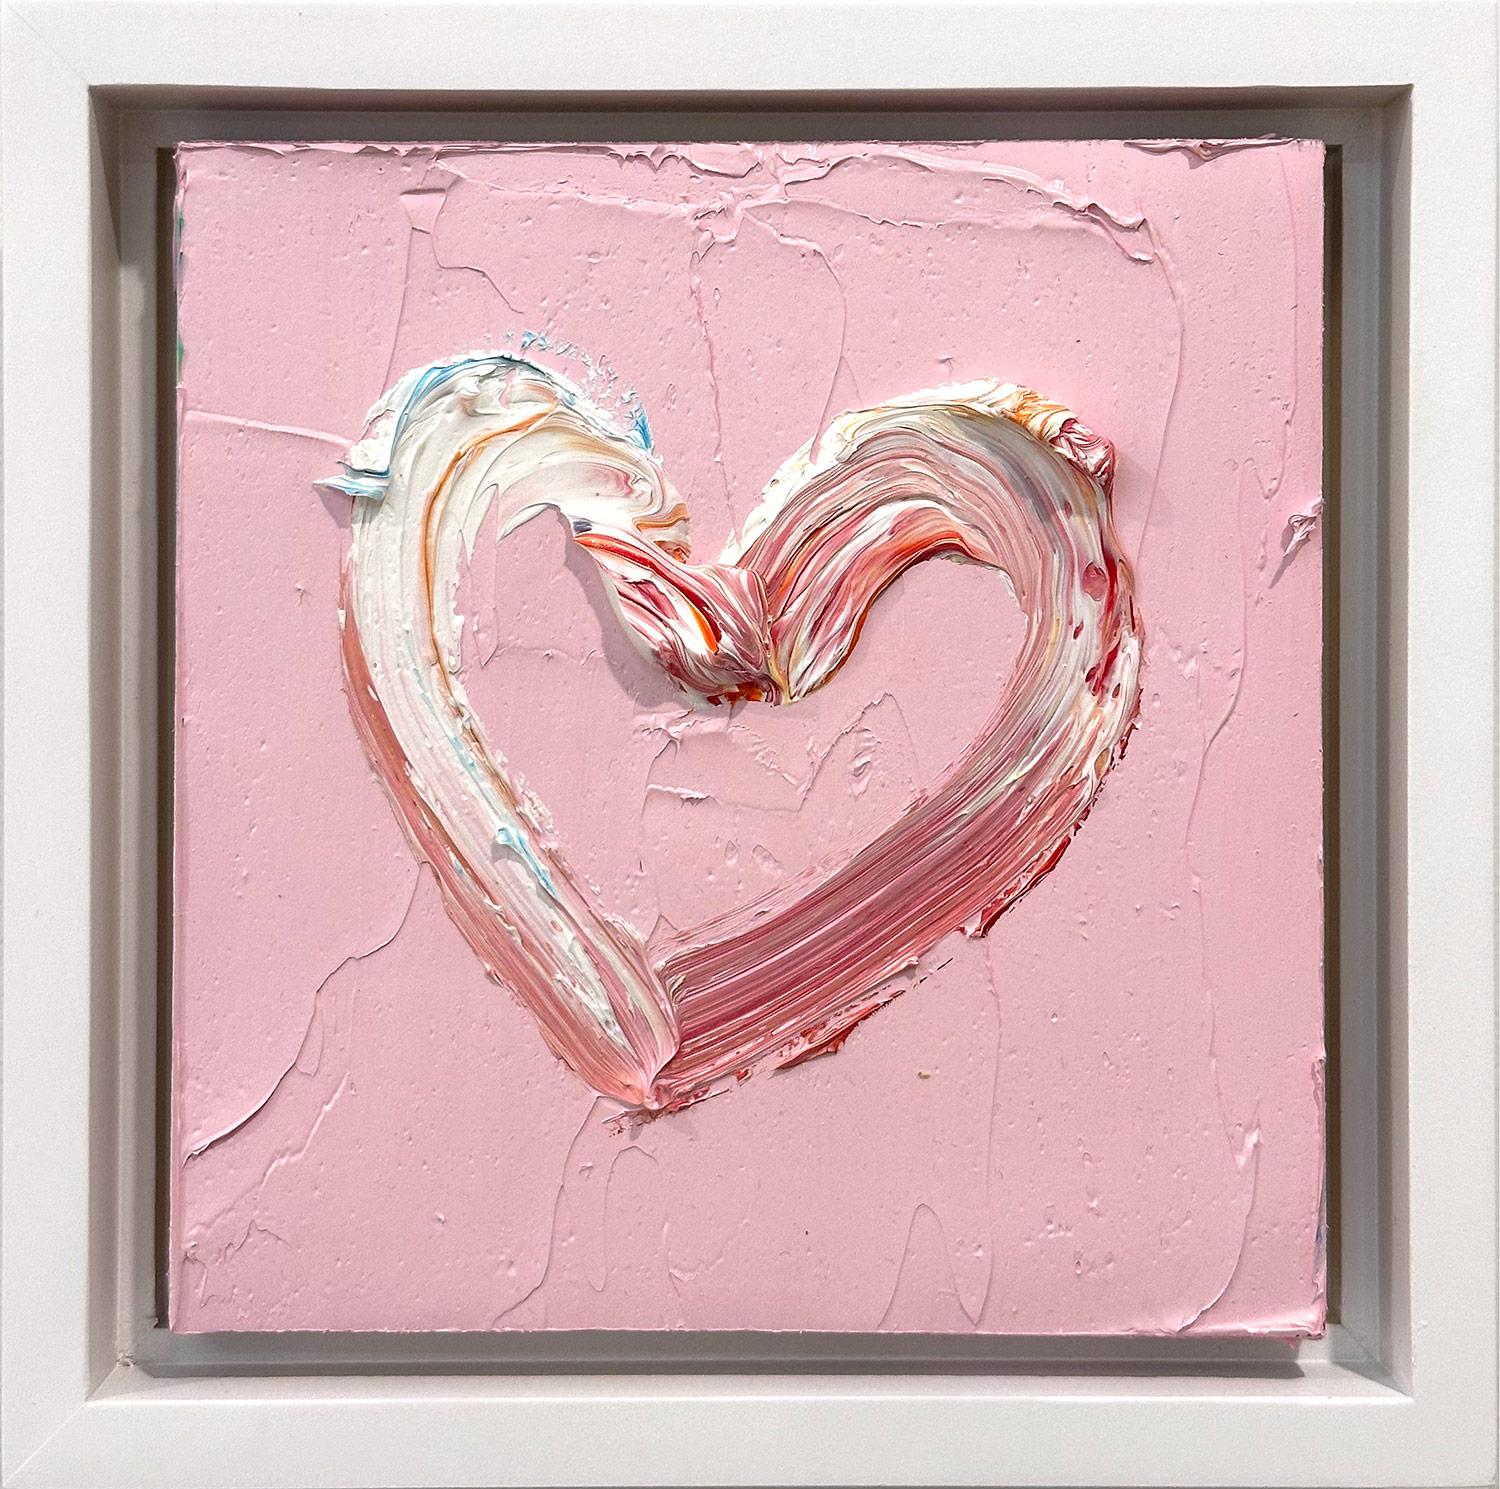 Cindy Shaoul Abstract Painting - "My Strawberry Shortcake Heart" Pink Pop Art Oil Painting & White Floater Frame